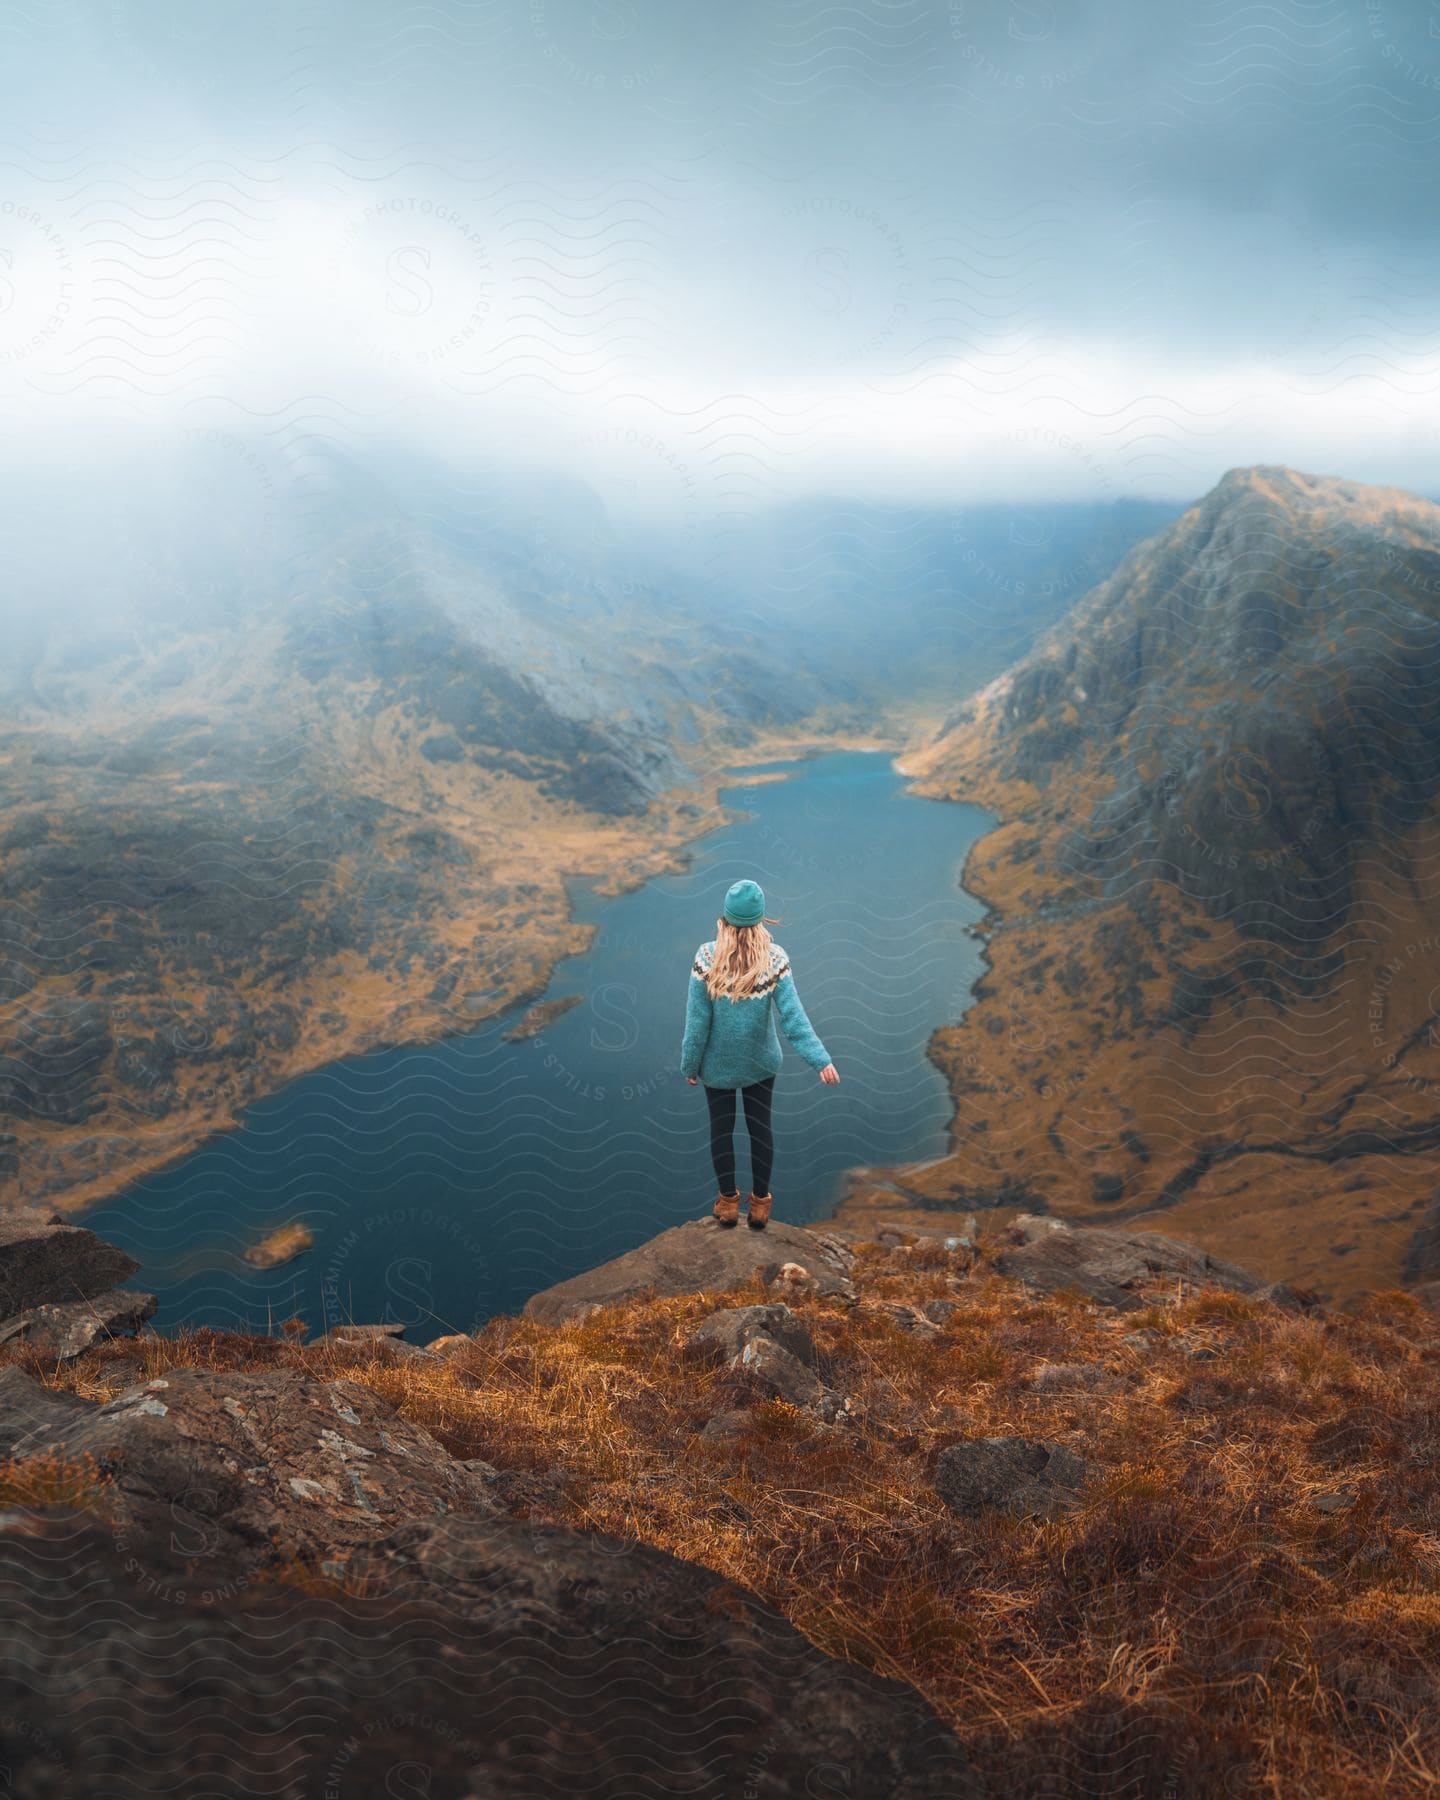 A person stands near a cliff overlooking a lake in the mountain wilderness